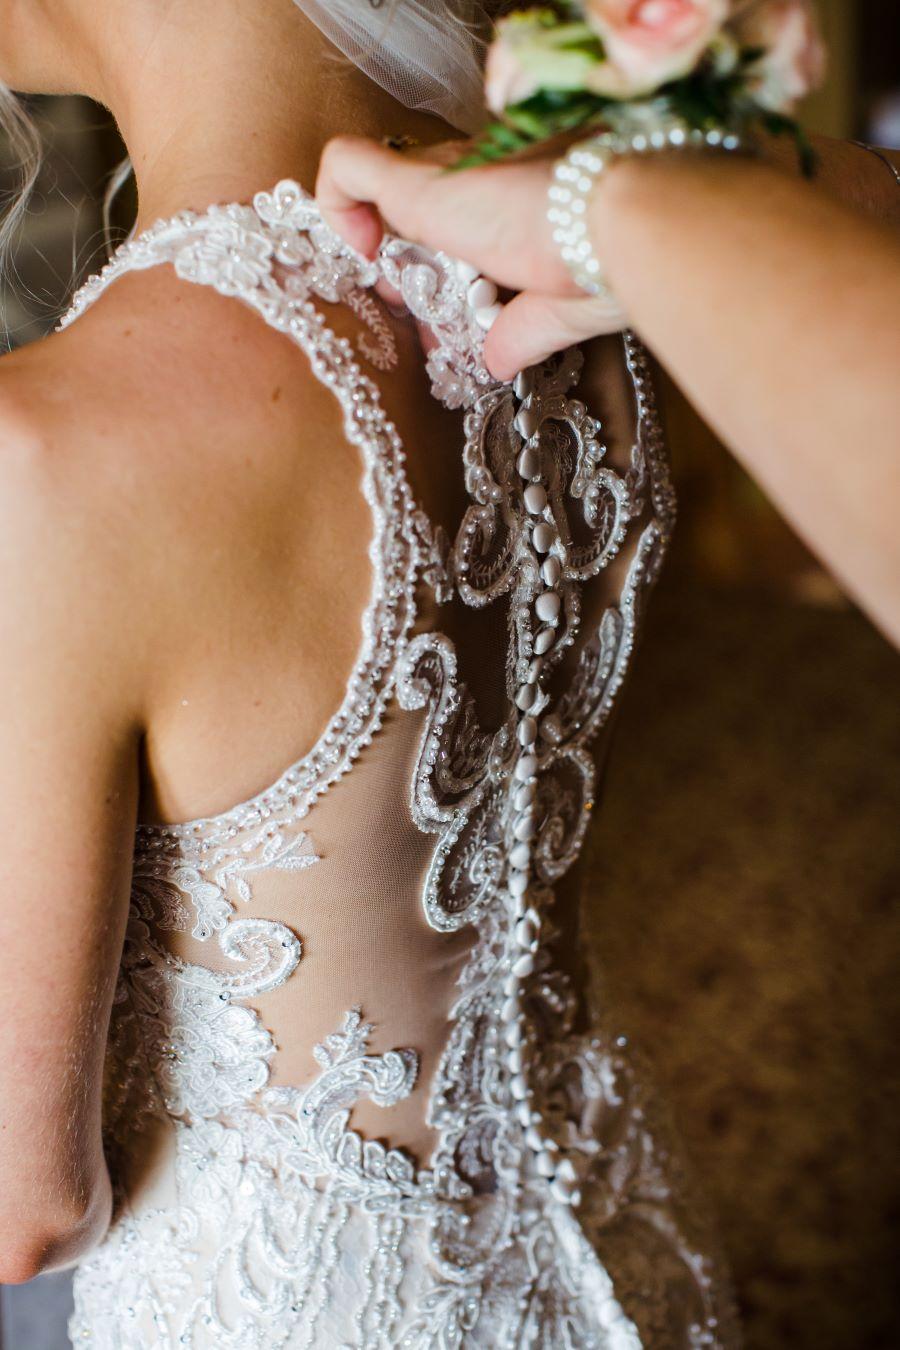 back of wedding dress details with lace and buttons